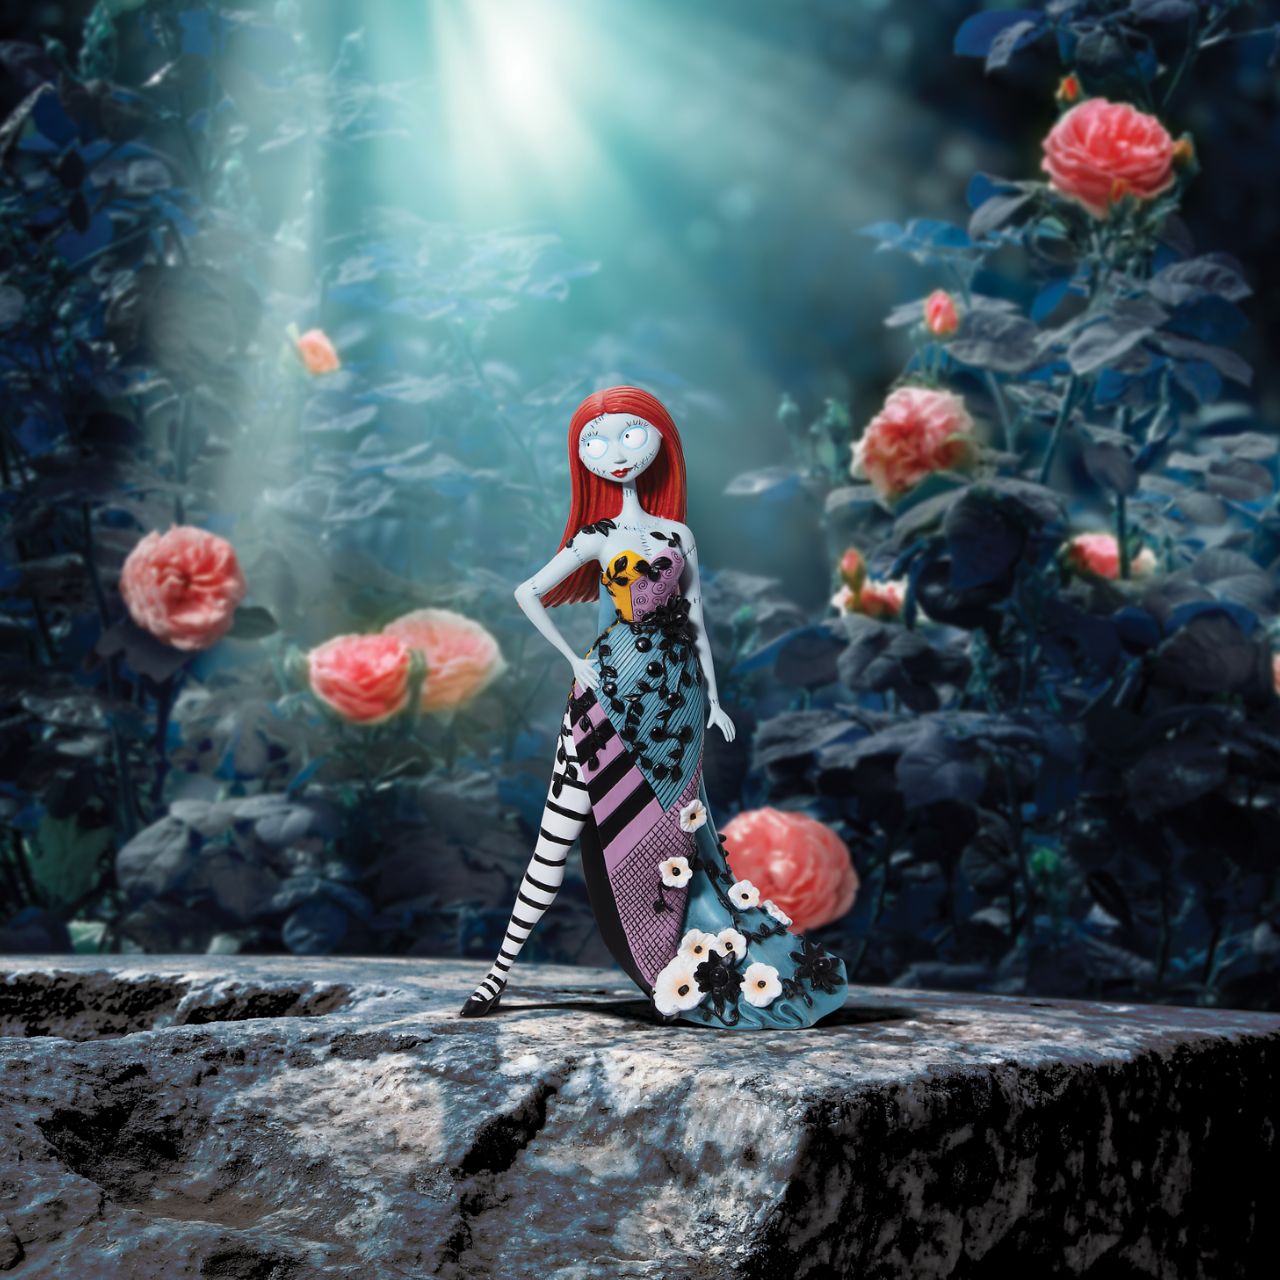 Sally from Tim Burton's The Nightmare Before Christmas has updated her rag doll dress into a stunning gown with sculpted thistles and vines going down the dress. Hand-painted by skilled artisans, Sally shines in her recognisable dress from the film.